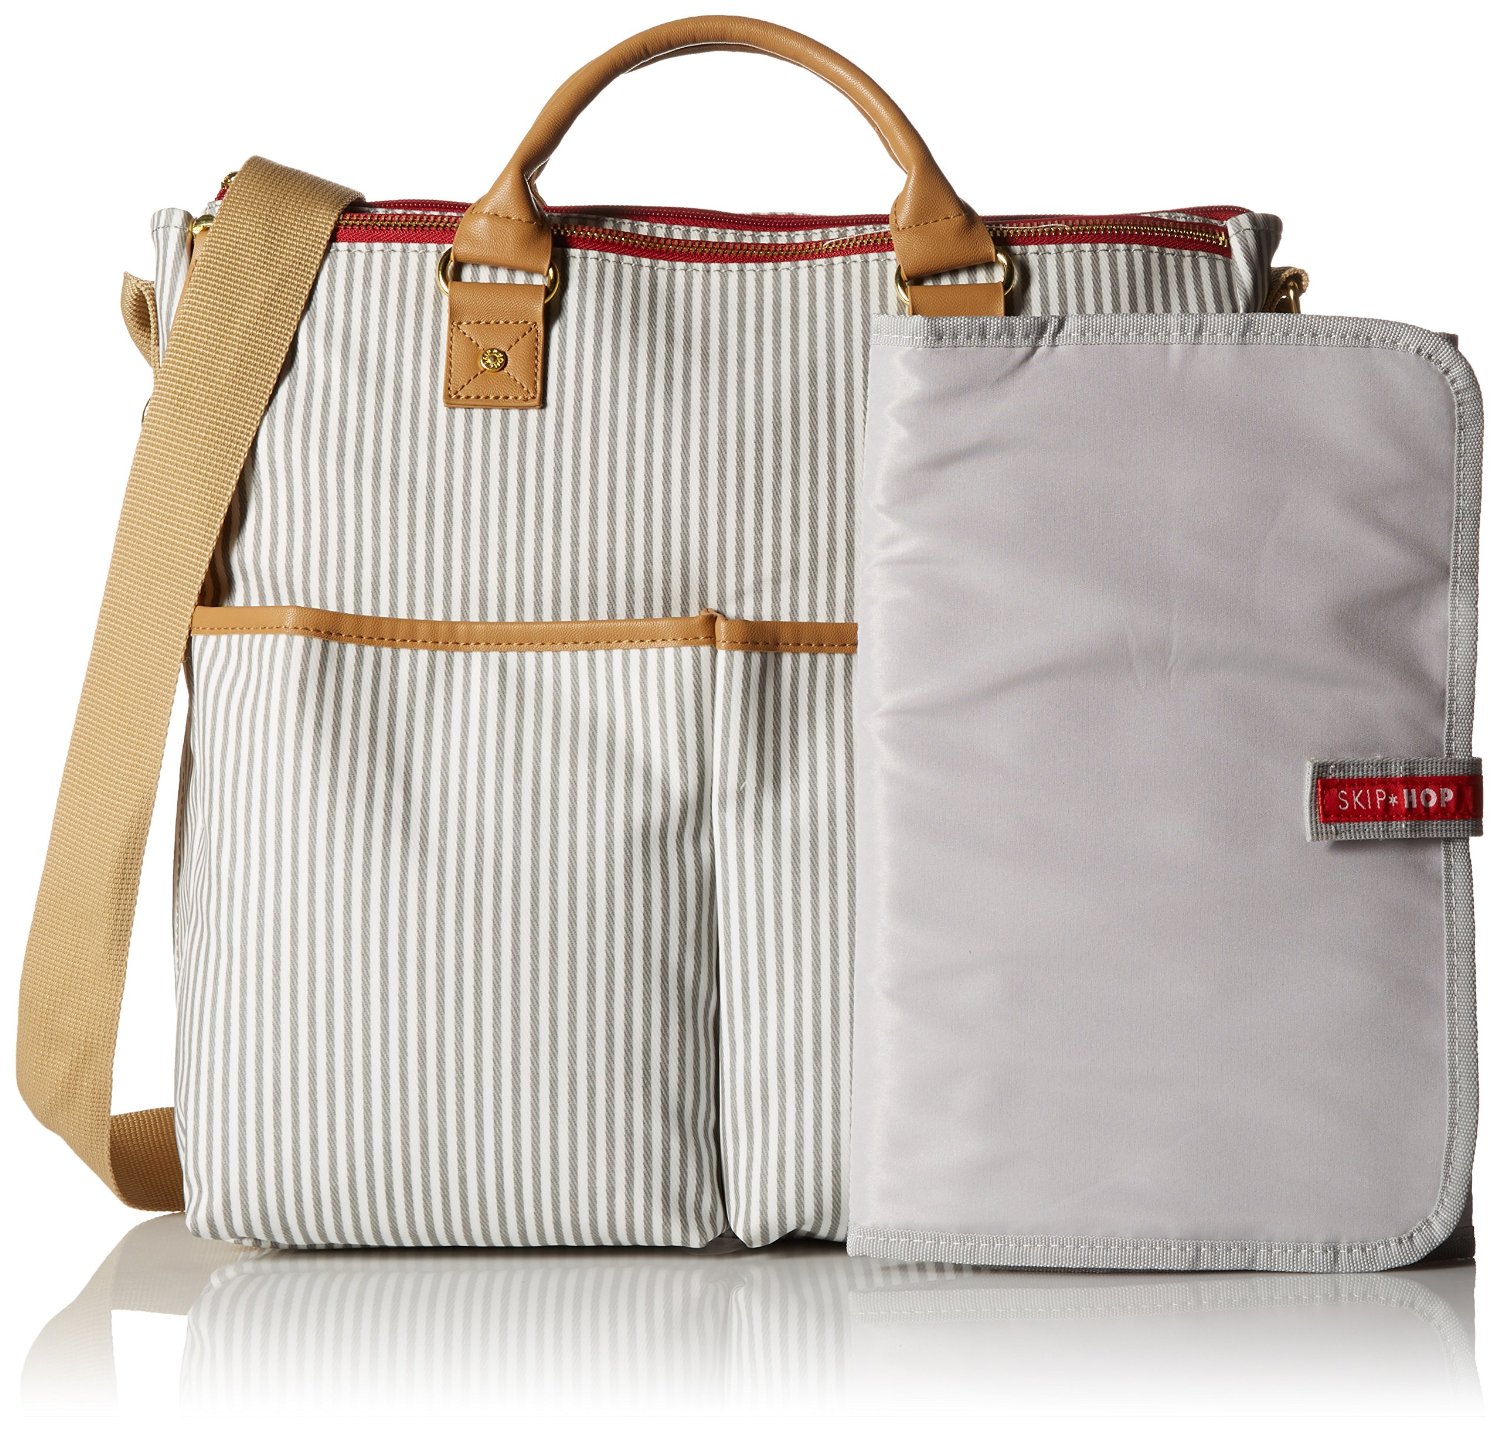 Best Diaper Bags 2019 - Baby Bags For A Trouble-Free Outing